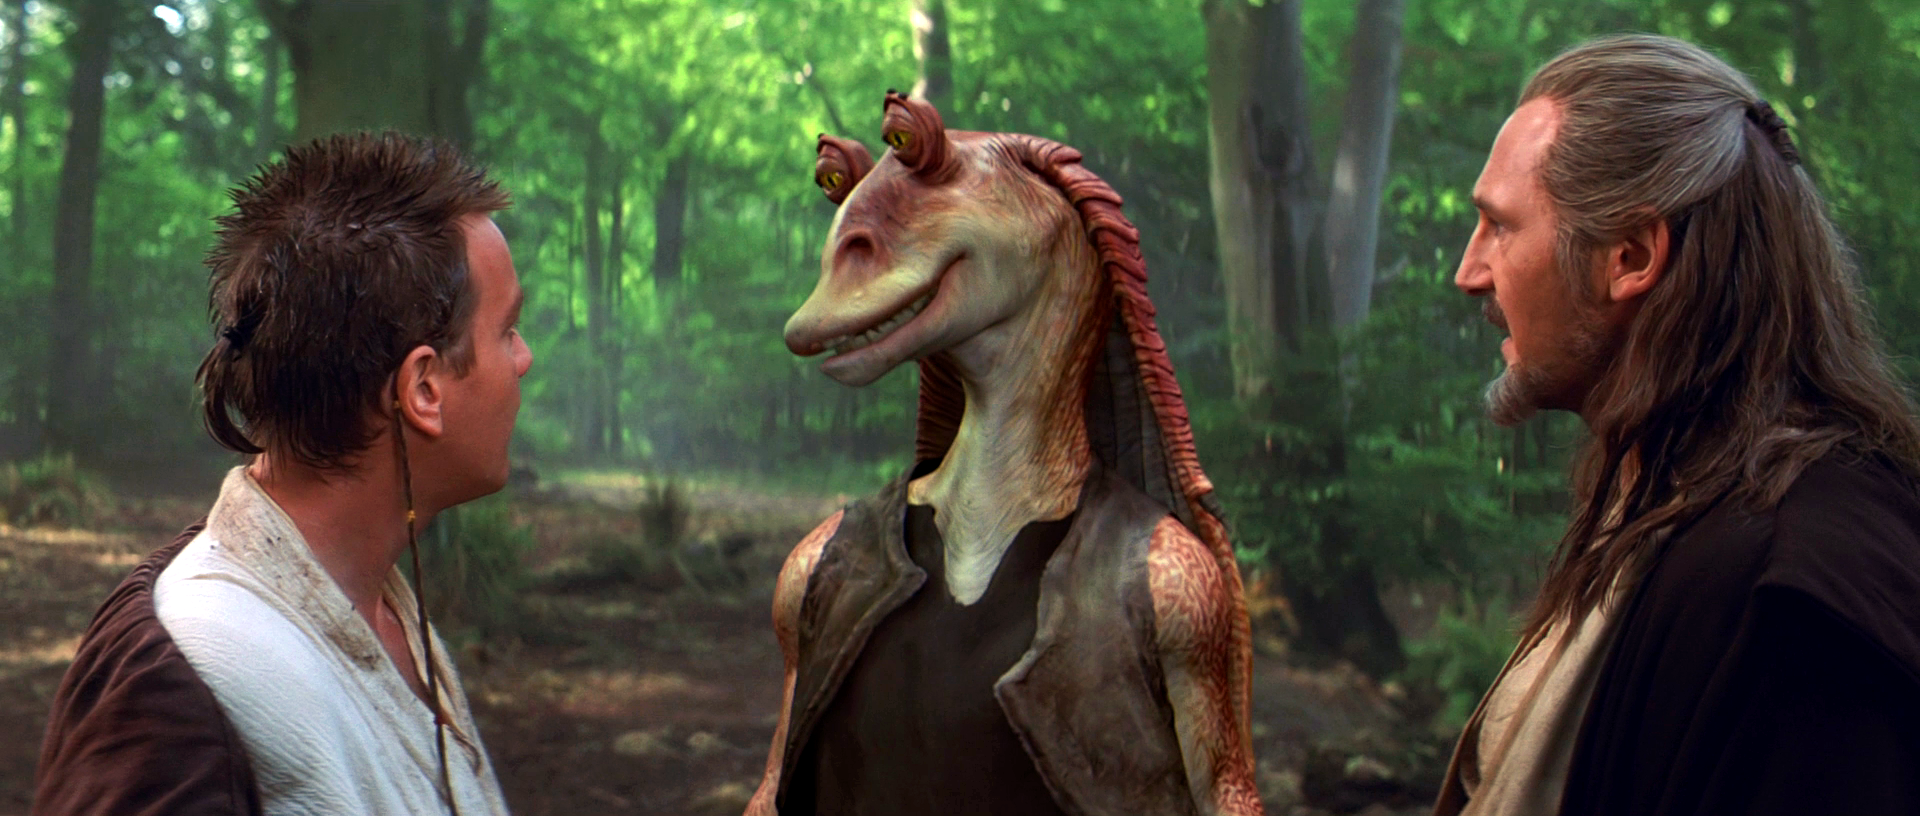 Why has Jar Jar Binks been banished from the Star Wars universe?, Star  Wars: The Force Awakens